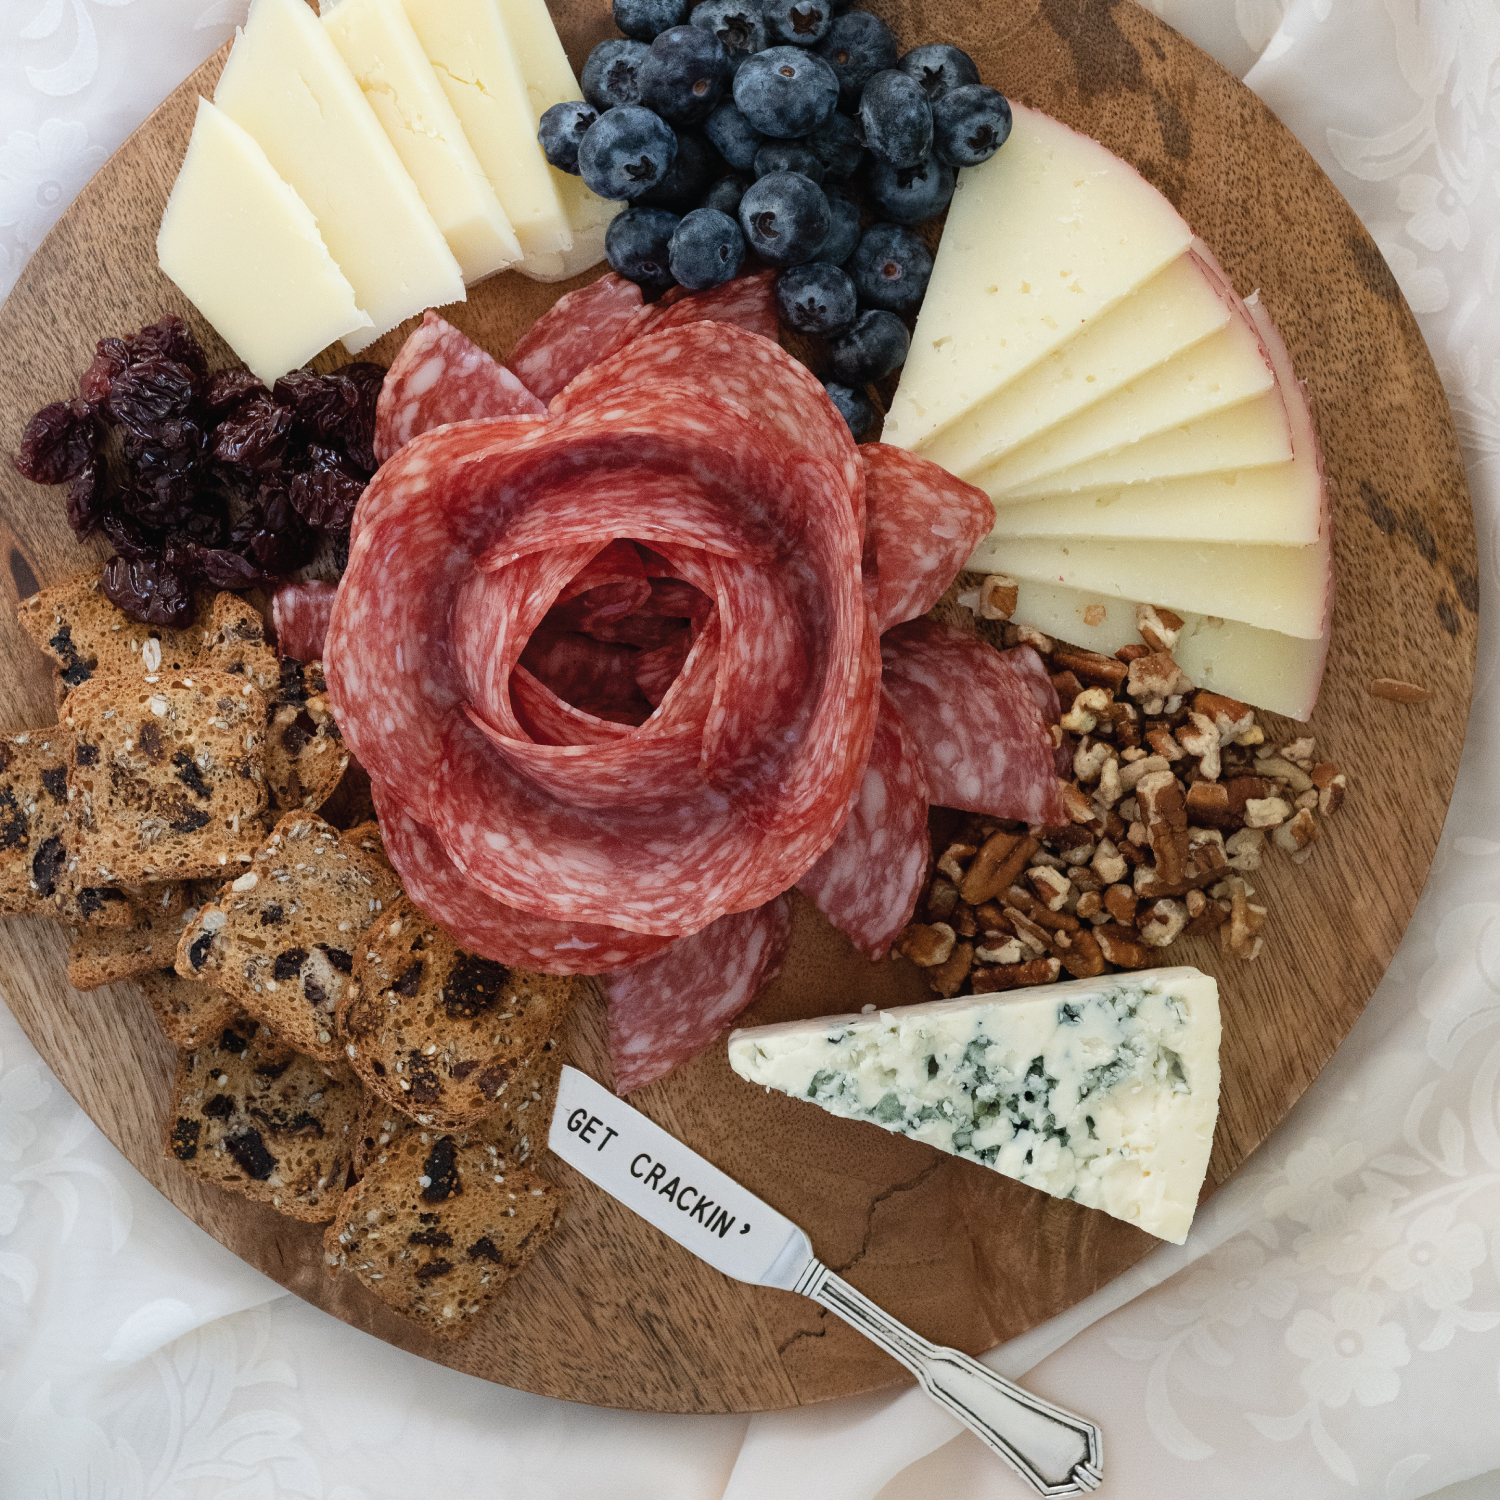 how to make a charcuterie grazing board for 2. Add in a pretty salami flower.